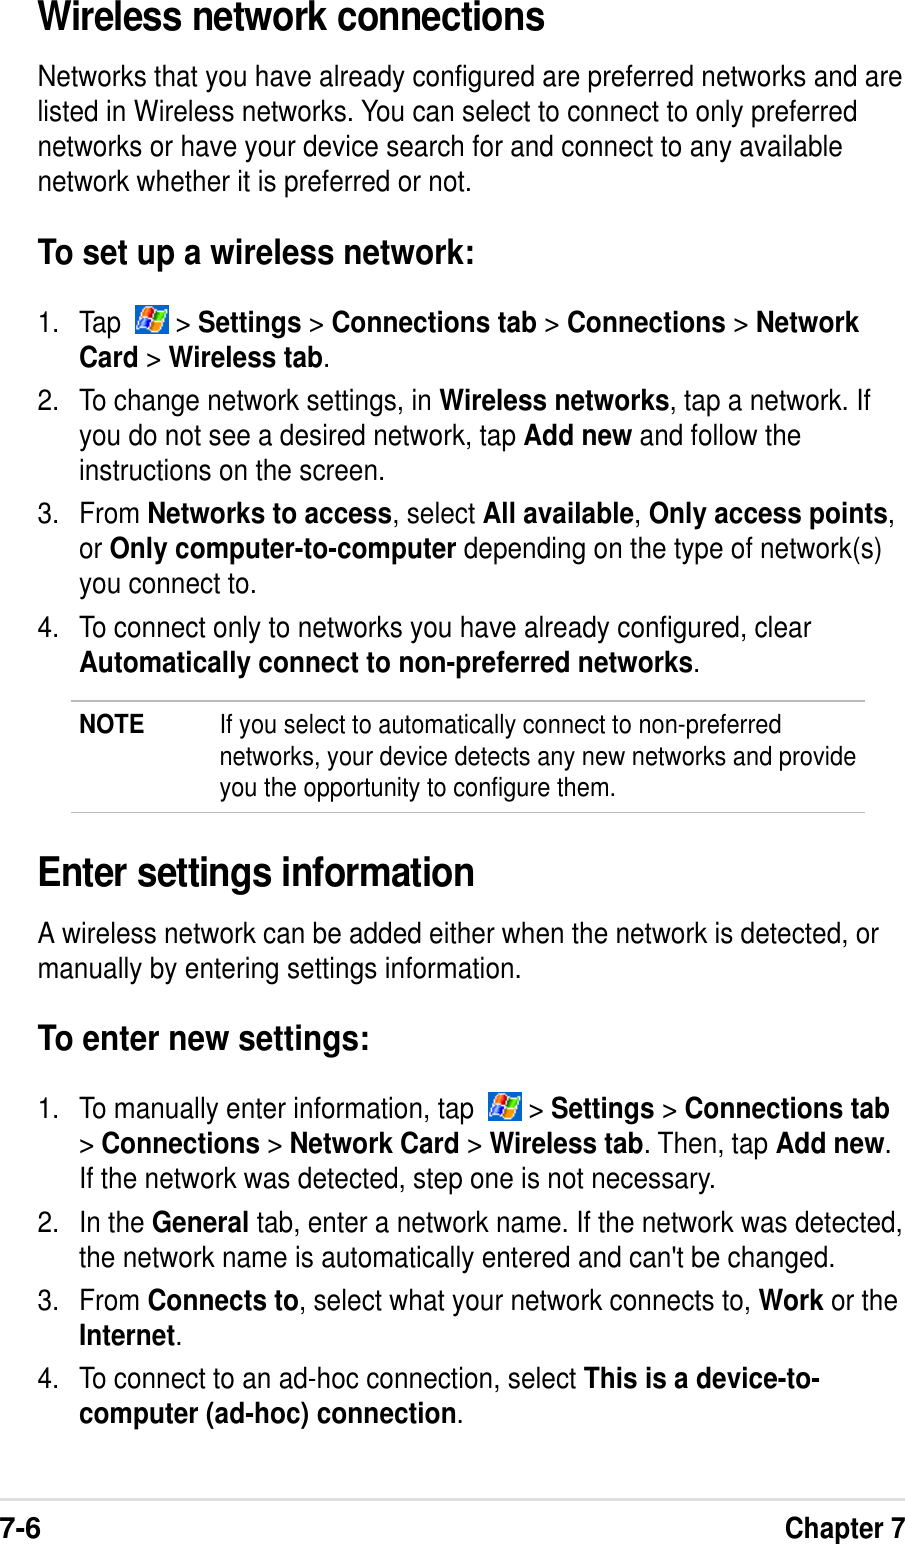 7-6Chapter 7Wireless network connectionsNetworks that you have already configured are preferred networks and arelisted in Wireless networks. You can select to connect to only preferrednetworks or have your device search for and connect to any availablenetwork whether it is preferred or not.To set up a wireless network:1. Tap    &gt; Settings &gt; Connections tab &gt; Connections &gt; NetworkCard &gt; Wireless tab.2. To change network settings, in Wireless networks, tap a network. Ifyou do not see a desired network, tap Add new and follow theinstructions on the screen.3. From Networks to access, select All available, Only access points,or Only computer-to-computer depending on the type of network(s)you connect to.4. To connect only to networks you have already configured, clearAutomatically connect to non-preferred networks.NOTE If you select to automatically connect to non-preferrednetworks, your device detects any new networks and provideyou the opportunity to configure them.Enter settings informationA wireless network can be added either when the network is detected, ormanually by entering settings information.To enter new settings:1. To manually enter information, tap    &gt; Settings &gt; Connections tab&gt; Connections &gt; Network Card &gt; Wireless tab. Then, tap Add new.If the network was detected, step one is not necessary.2. In the General tab, enter a network name. If the network was detected,the network name is automatically entered and can&apos;t be changed.3. From Connects to, select what your network connects to, Work or theInternet.4. To connect to an ad-hoc connection, select This is a device-to-computer (ad-hoc) connection.